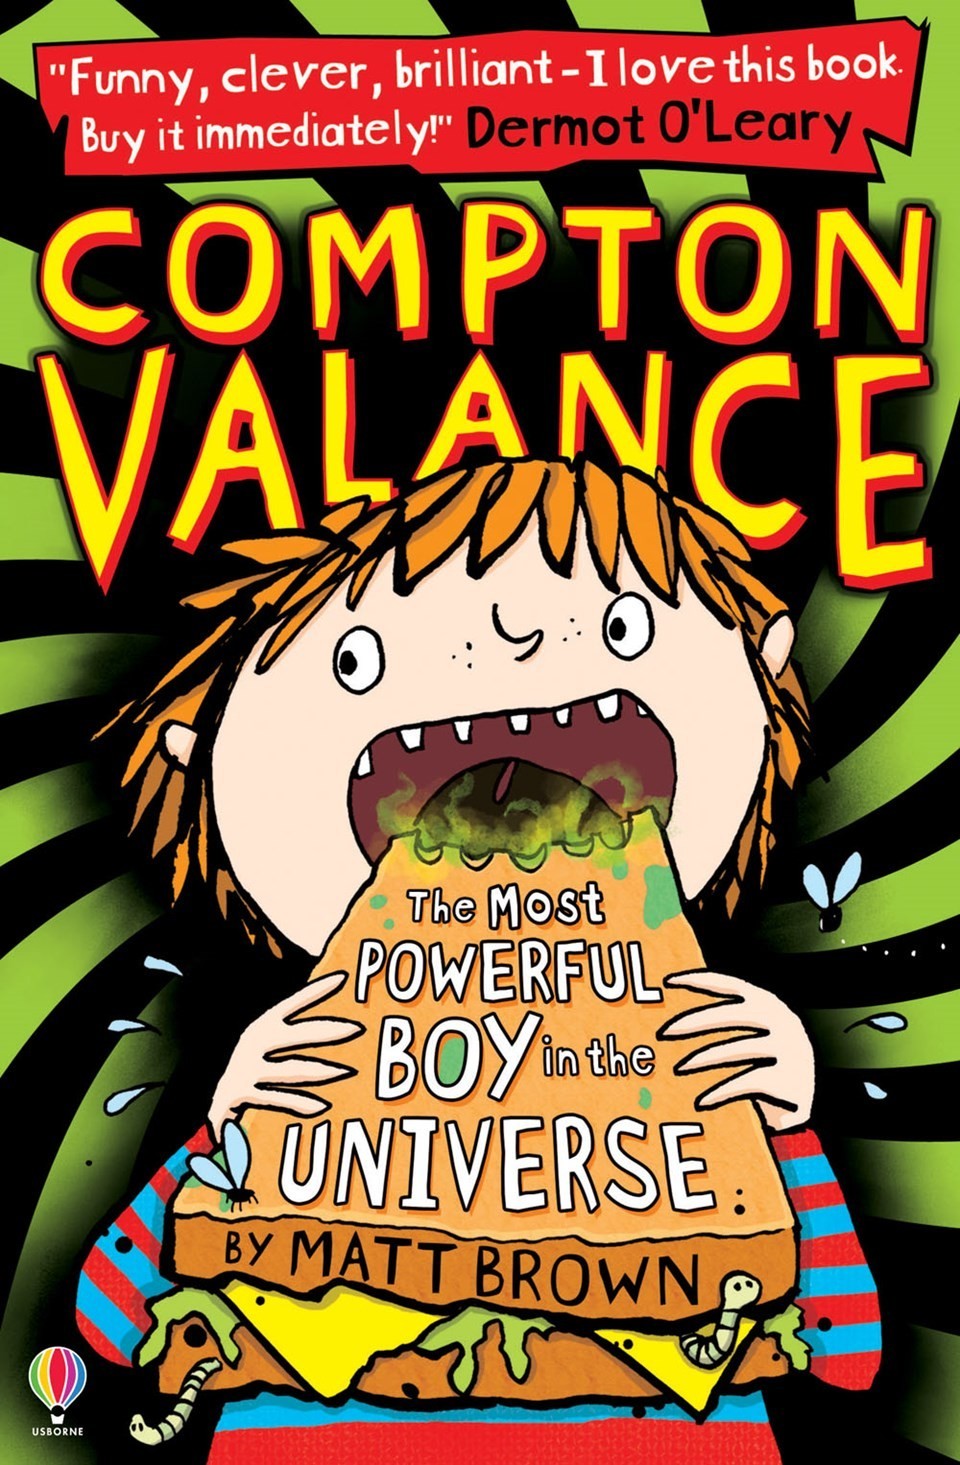 Compton Valance — The Most Powerful Boy in the Universe